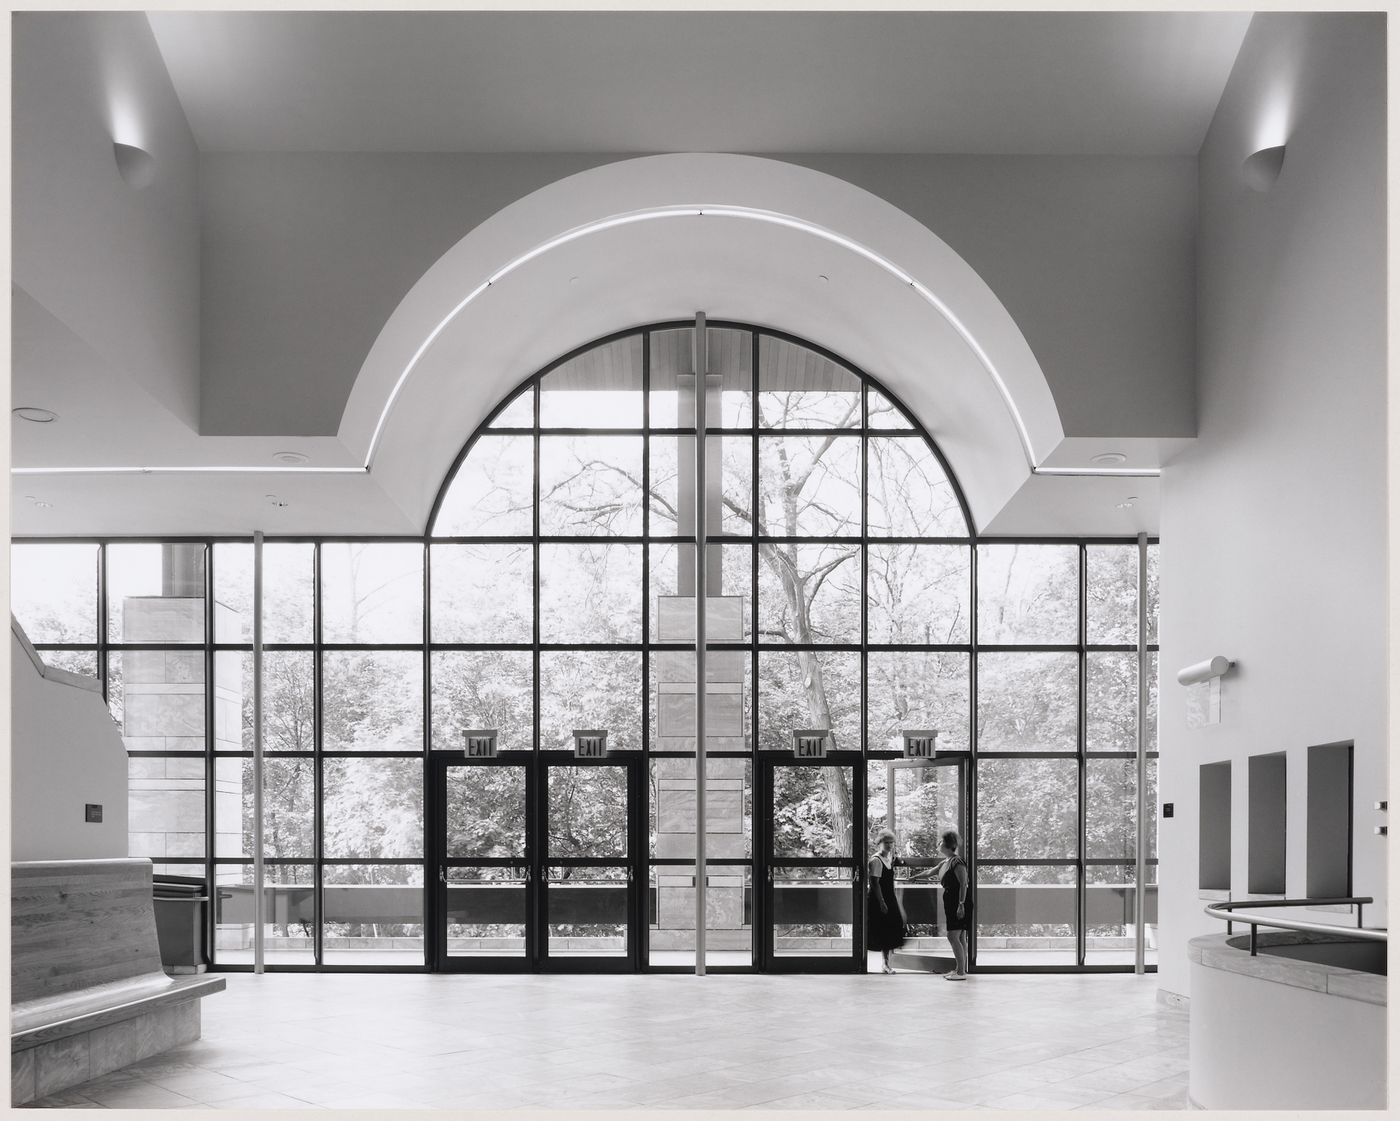 Center for Theatre Arts, Cornell University, Ithaca, New York: interior view of the main entrance